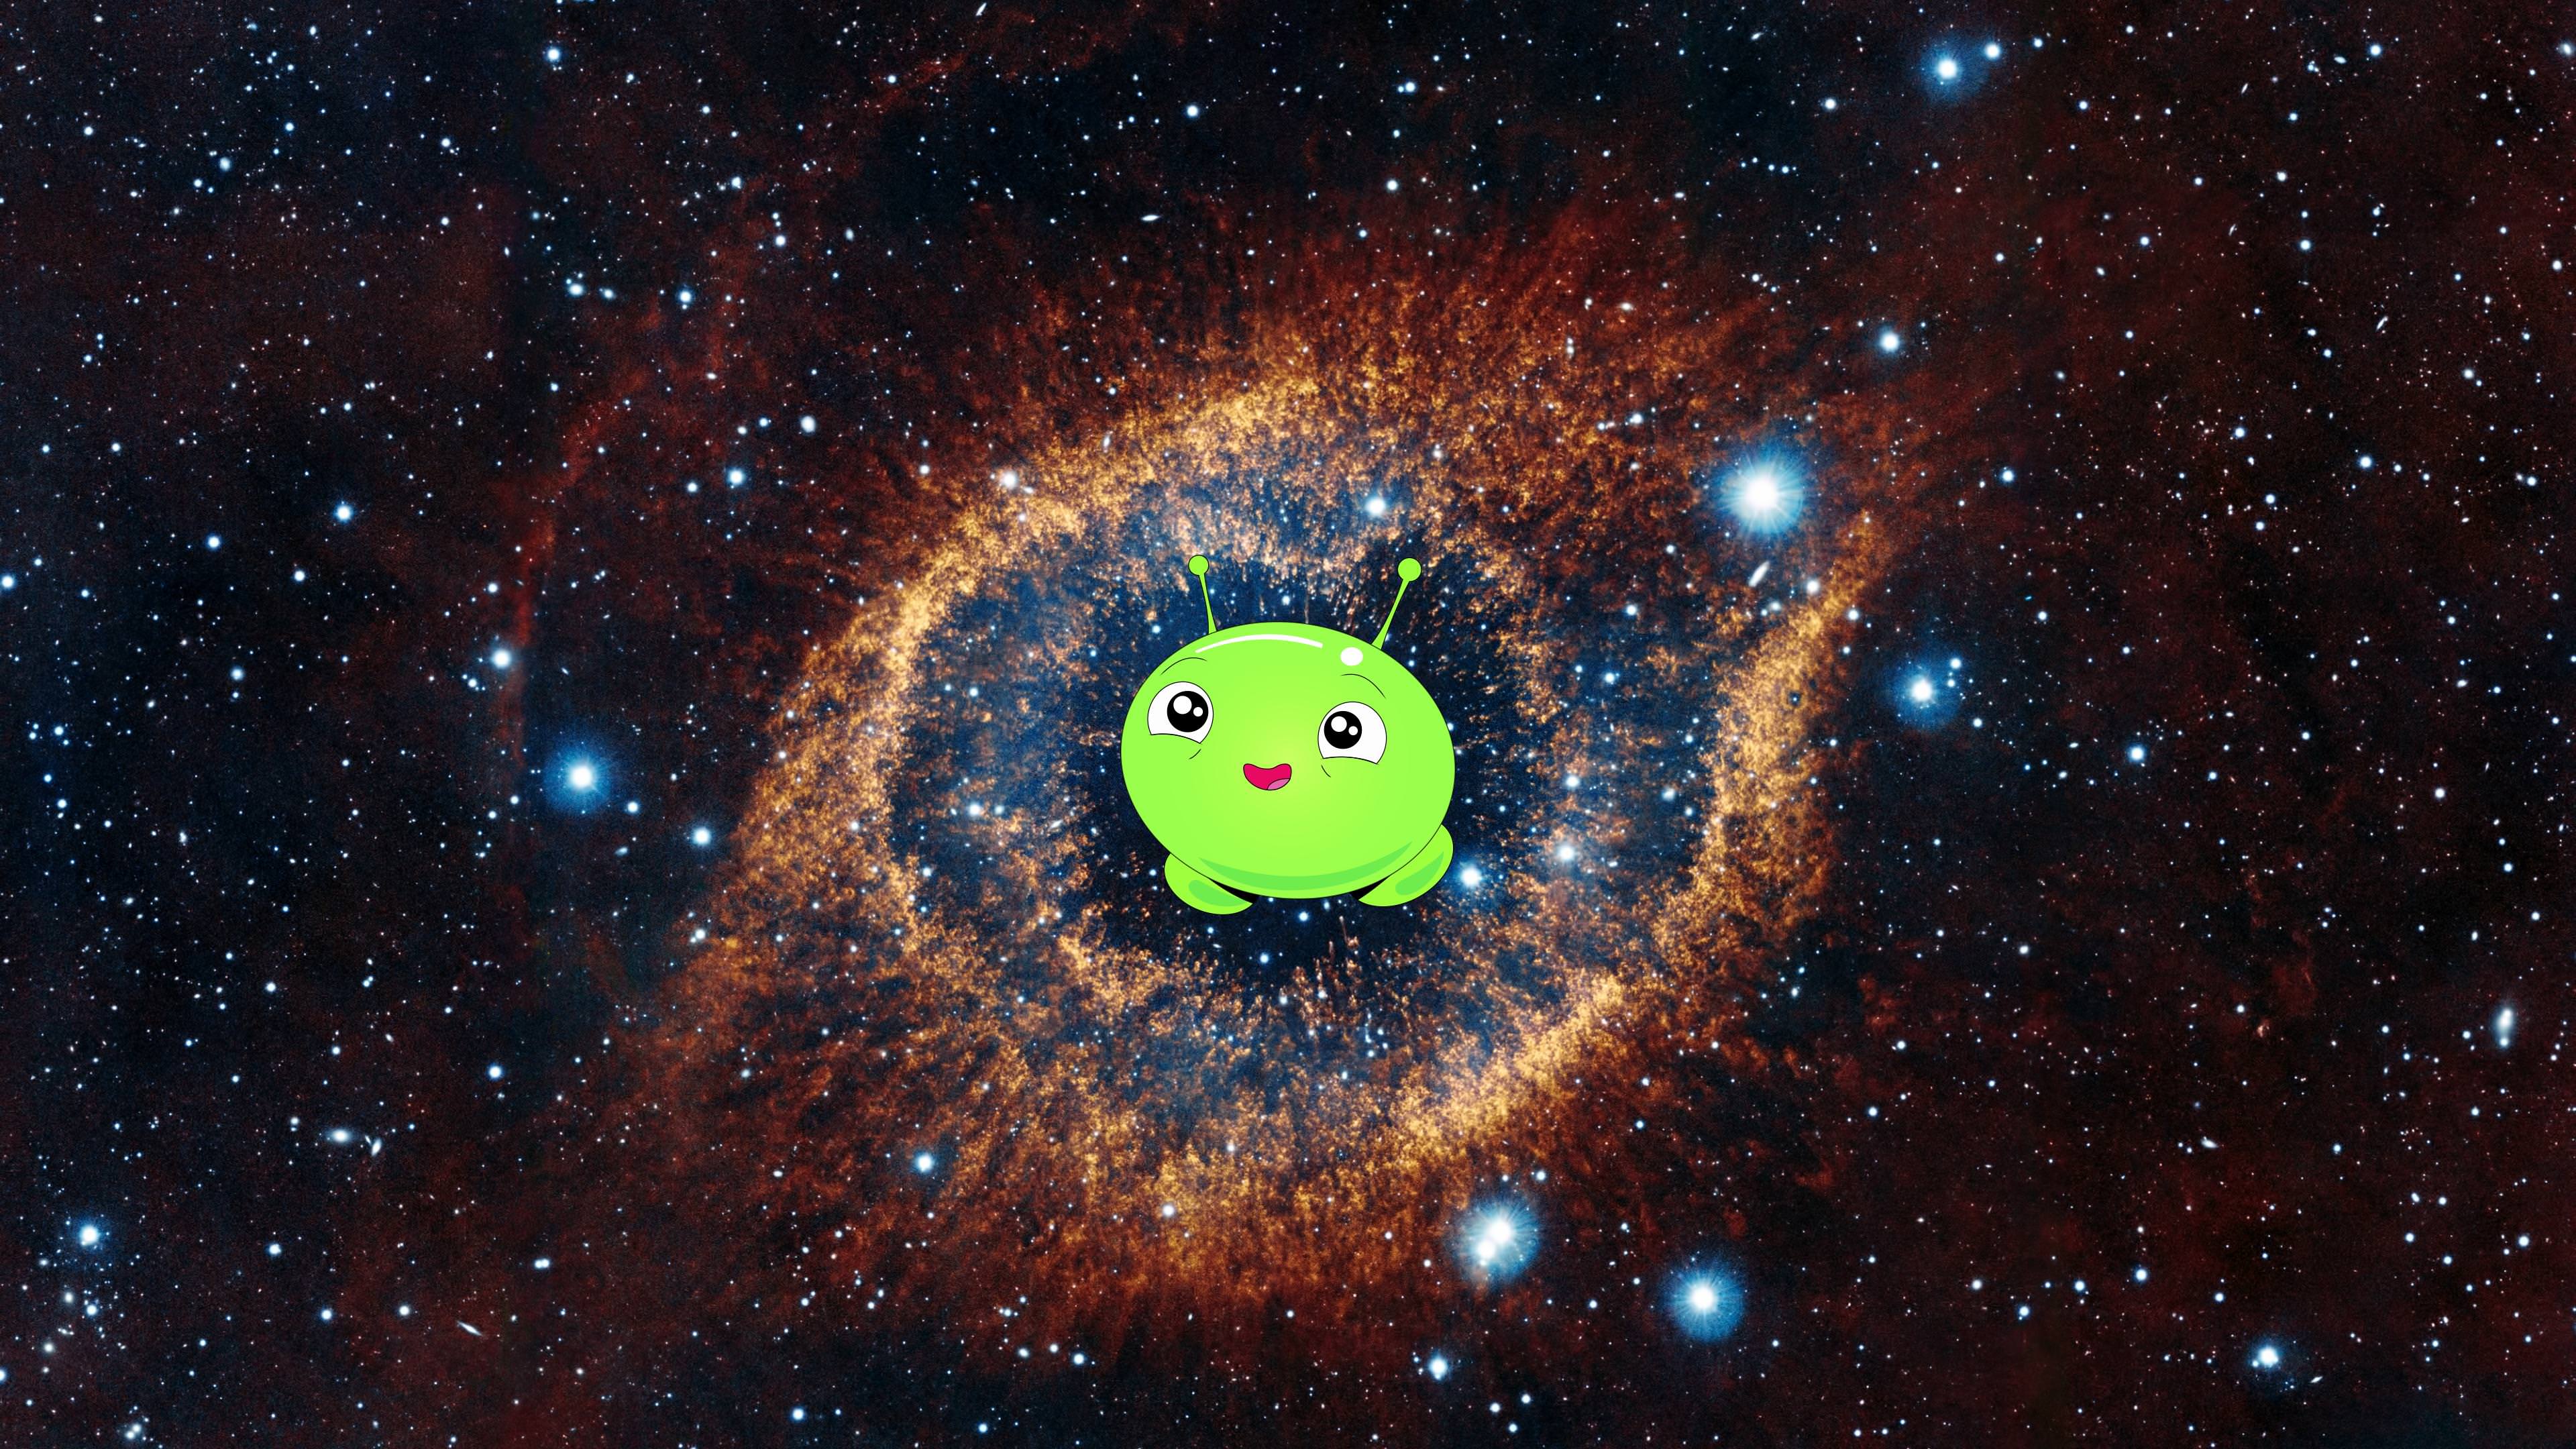 Made a 4K Mooncake space wallpaper!